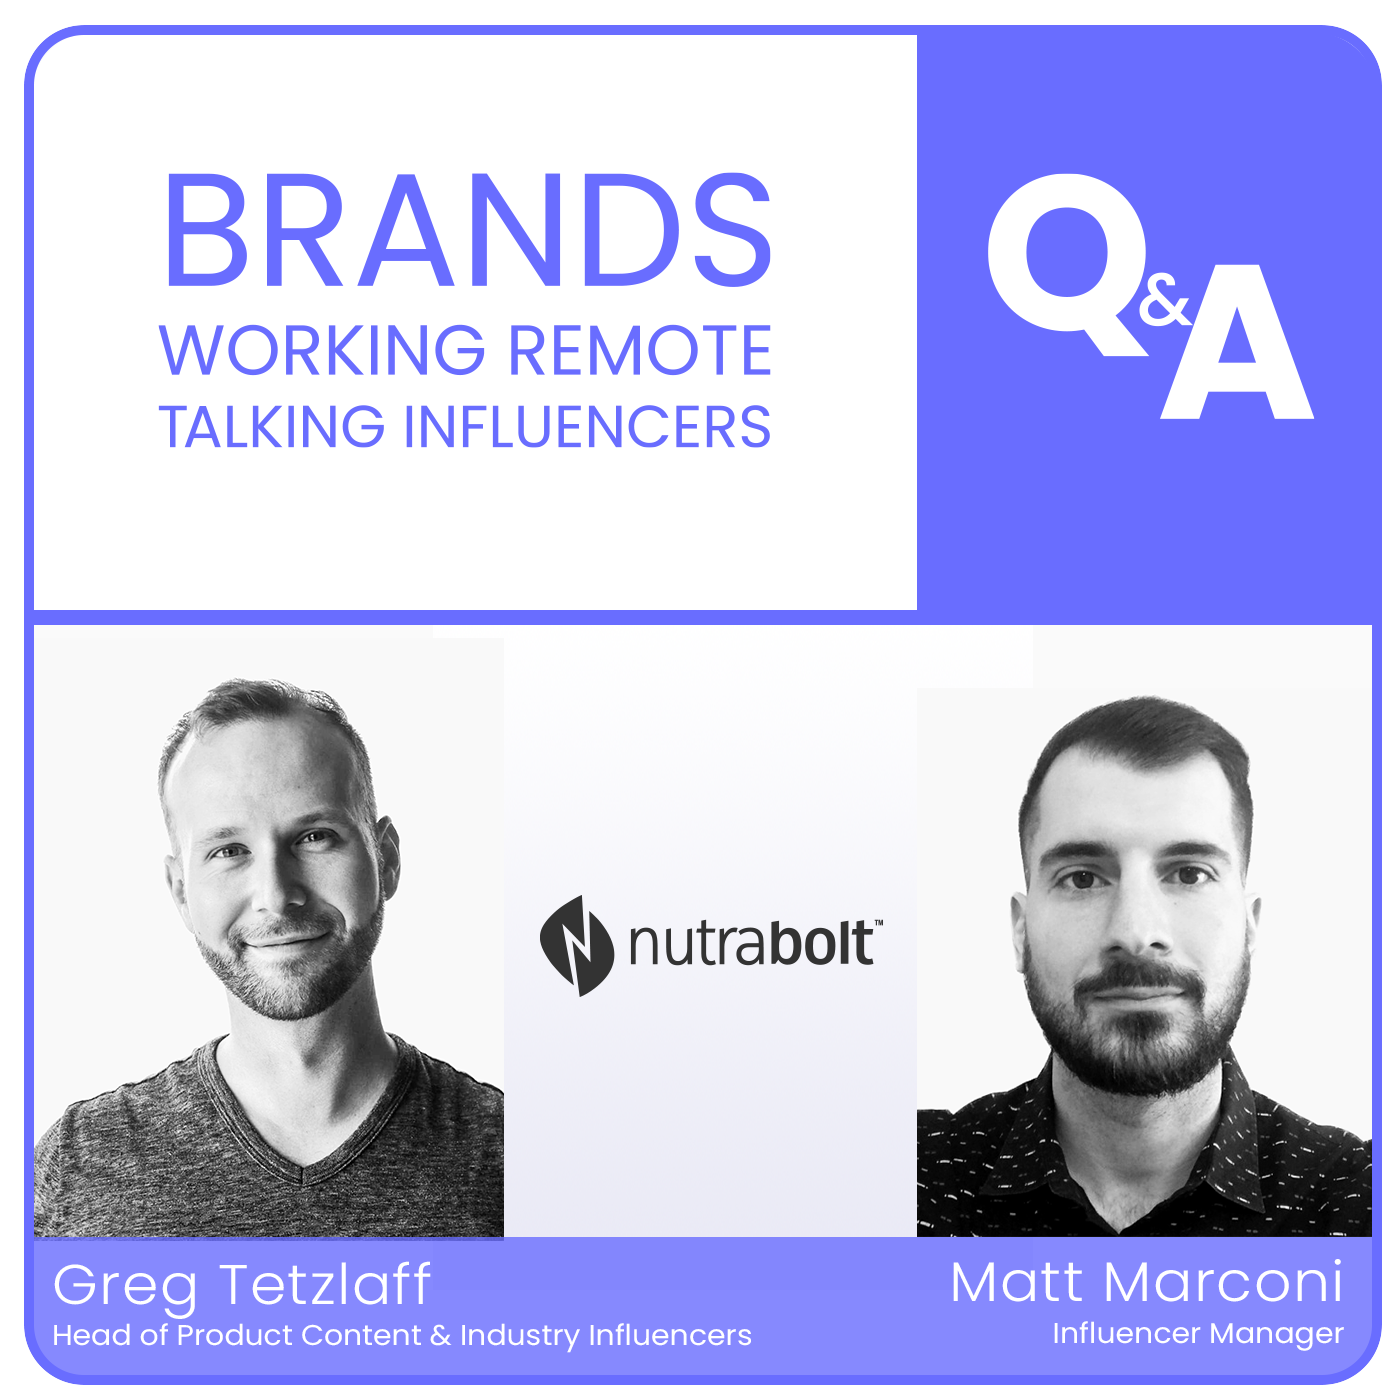 Image detailing brand-influencer relationships with GRIN's influencer marketing podcast "brands working remote talking influencers" with nutrabolt's Gret Tetzlaff and Matt Marconi